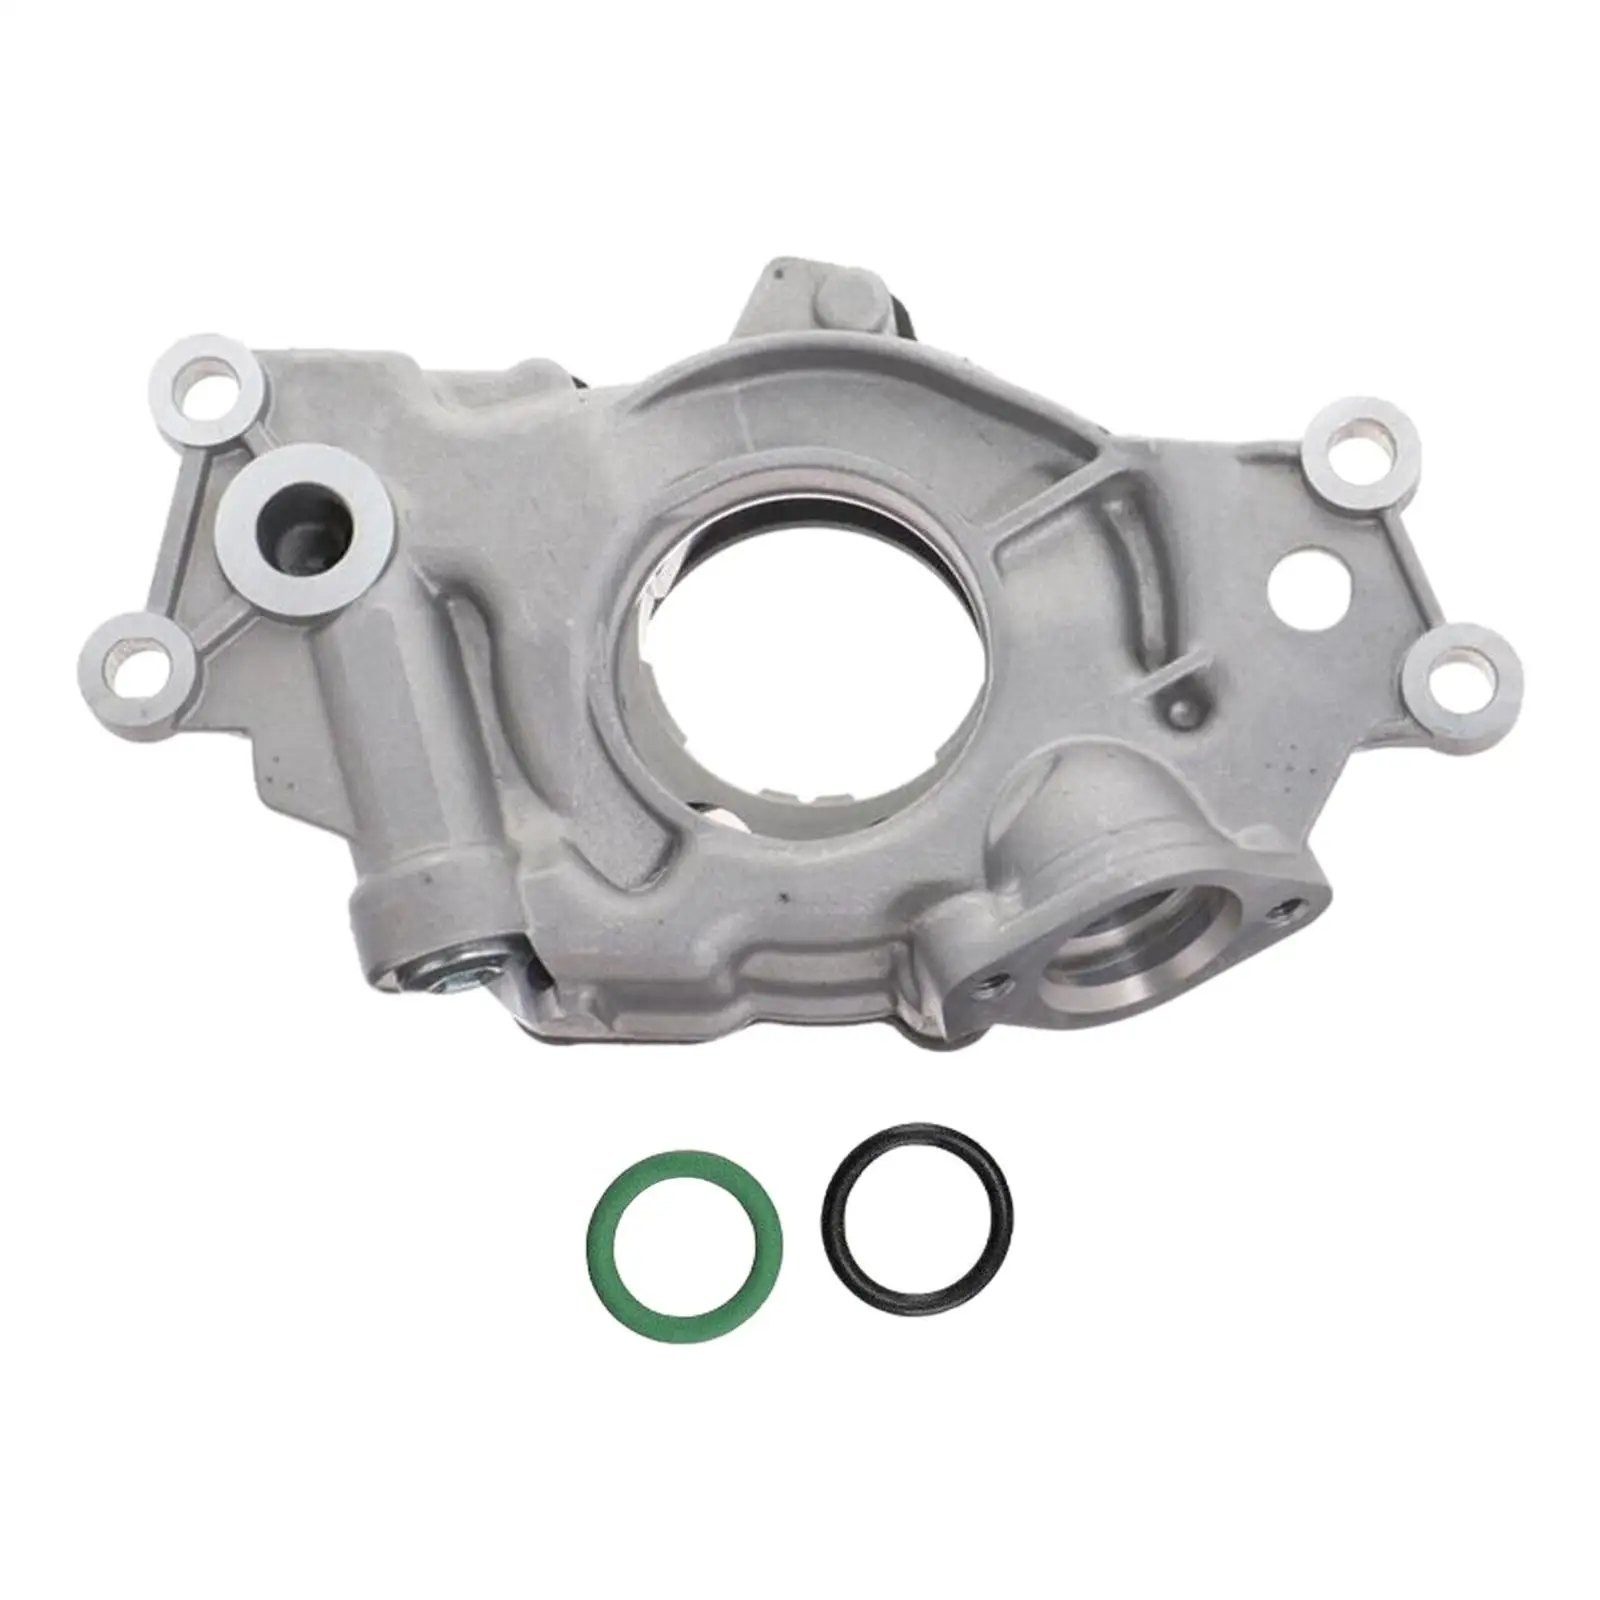 Oil Pump High Performance Professional Easy to Install Alloy Quality M365hv High Volume Oil Pumps for L92 L99 LS4 L9H Lsa